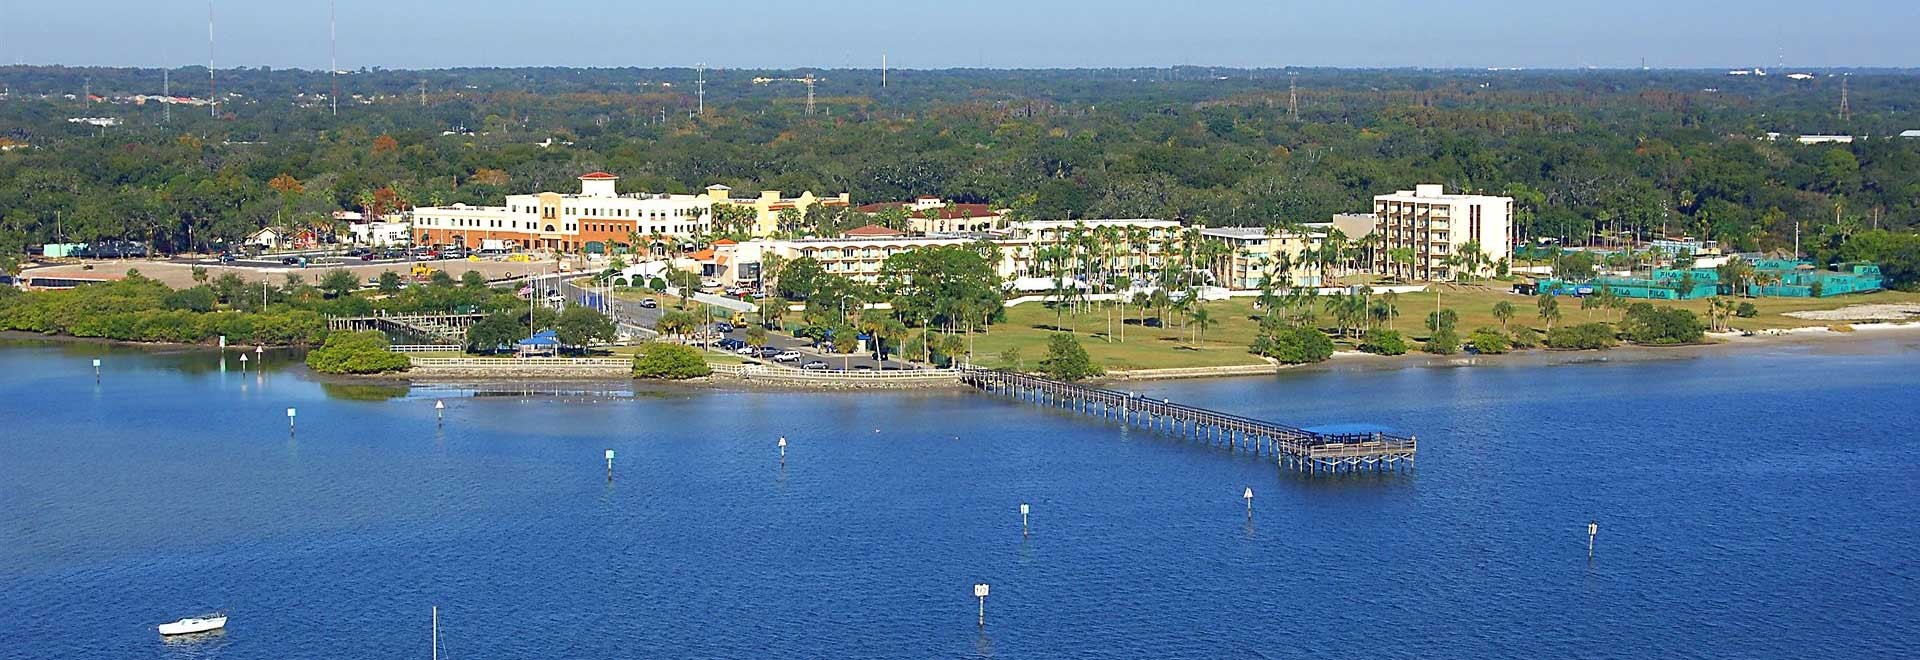 Safety Harbor Resort and Spa, Florida - Book. Travel. Play.